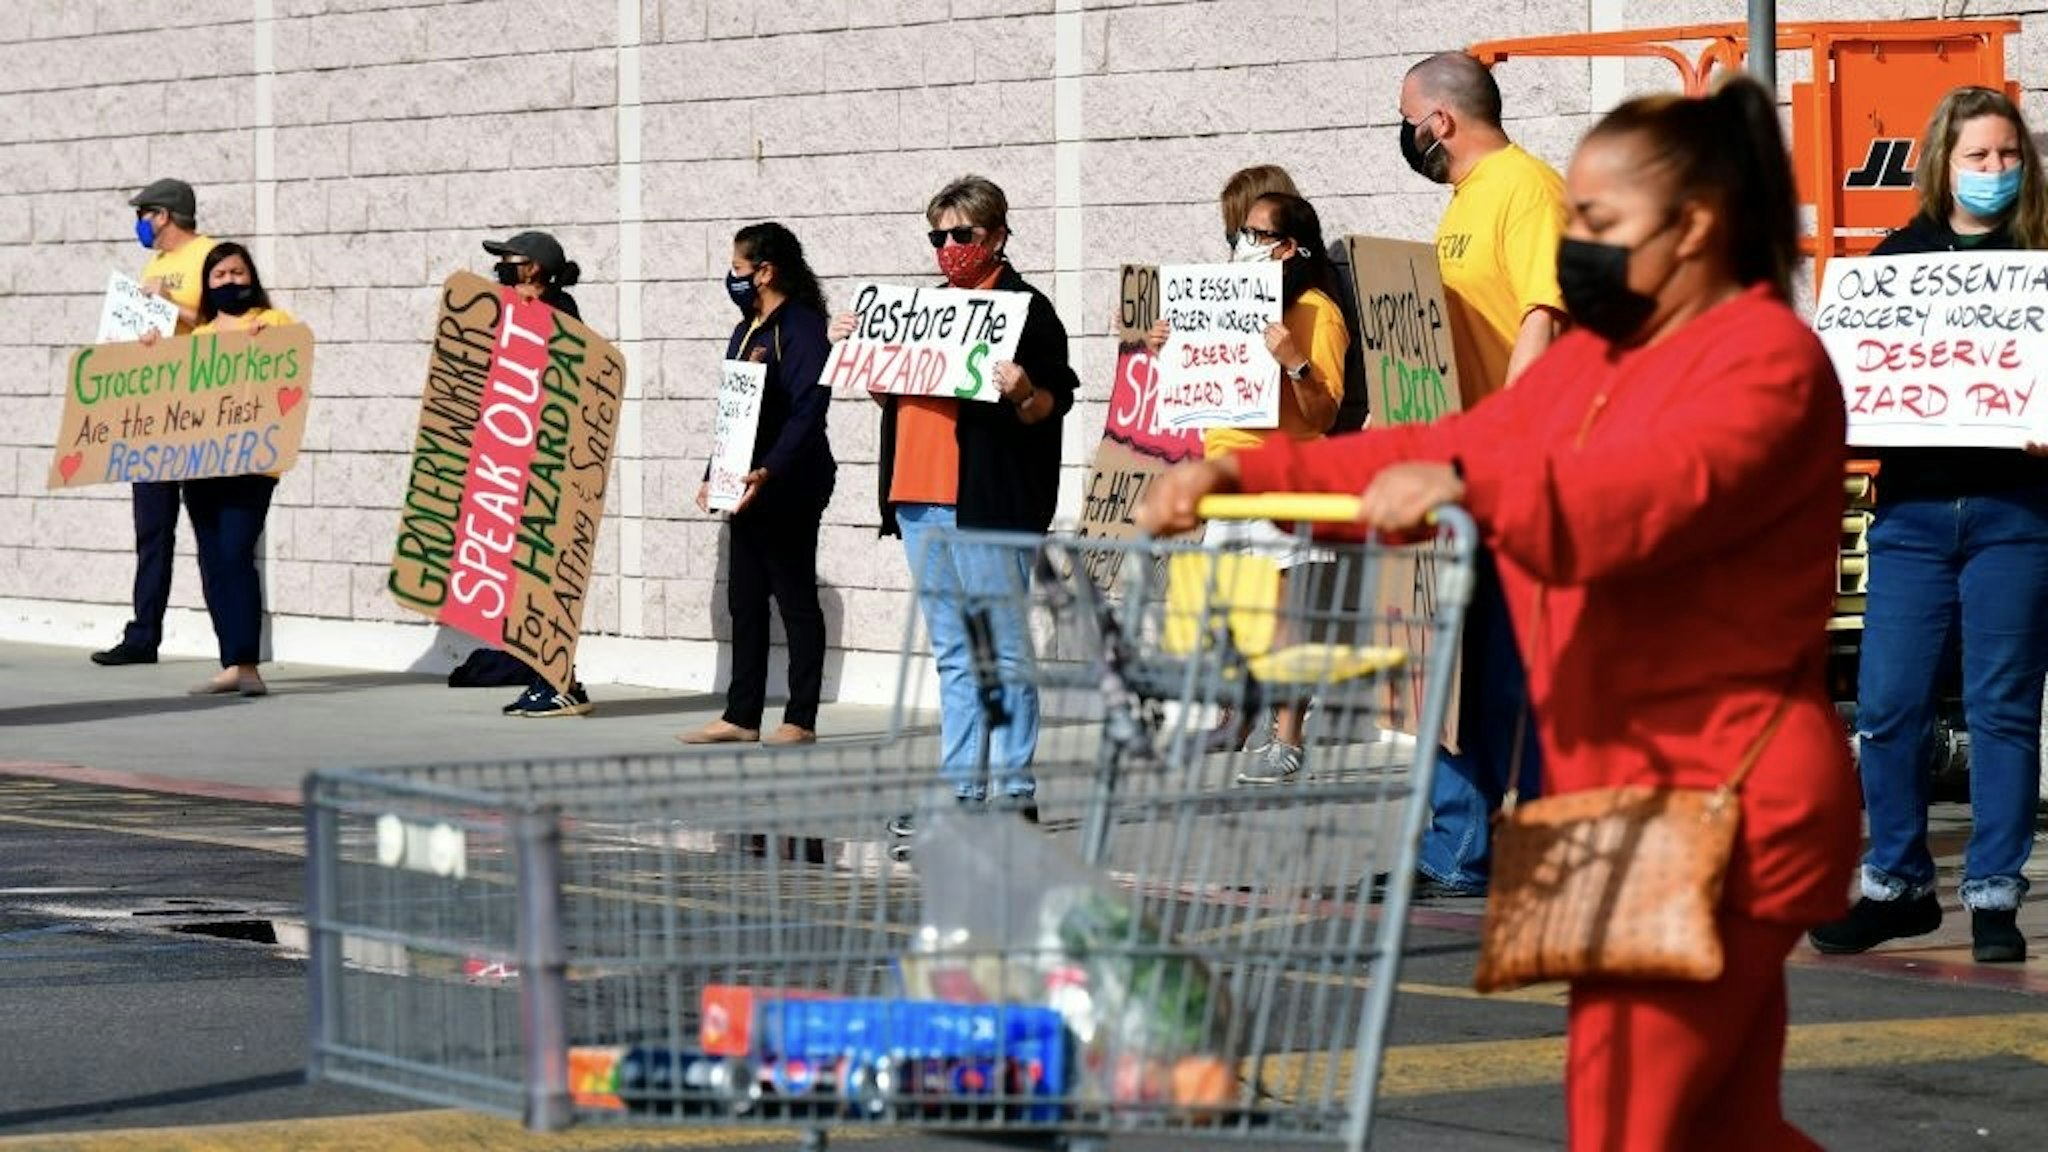 Supermarket workers hold placards in protest in front of a Food 4 Less supermarket in Long Beach, California on February 3, 2021, after a decision by owner Kroger to close two supermarkets rather than pay workers an additional $4.00 in "hazard pay" for their continued work during the coronavirus pandemic. - Kroger, which owns Ralphs and food 4 Less, said it will close one of each store in April after the Long Beach city council passed a law mandating "hazard pay" for grocery store workers. Long Beach was the first city in the region to approve a hazard pay ordinance. (Photo by Frederic J. BROWN / AFP) (Photo by FREDERIC J. BROWN/AFP via Getty Images)